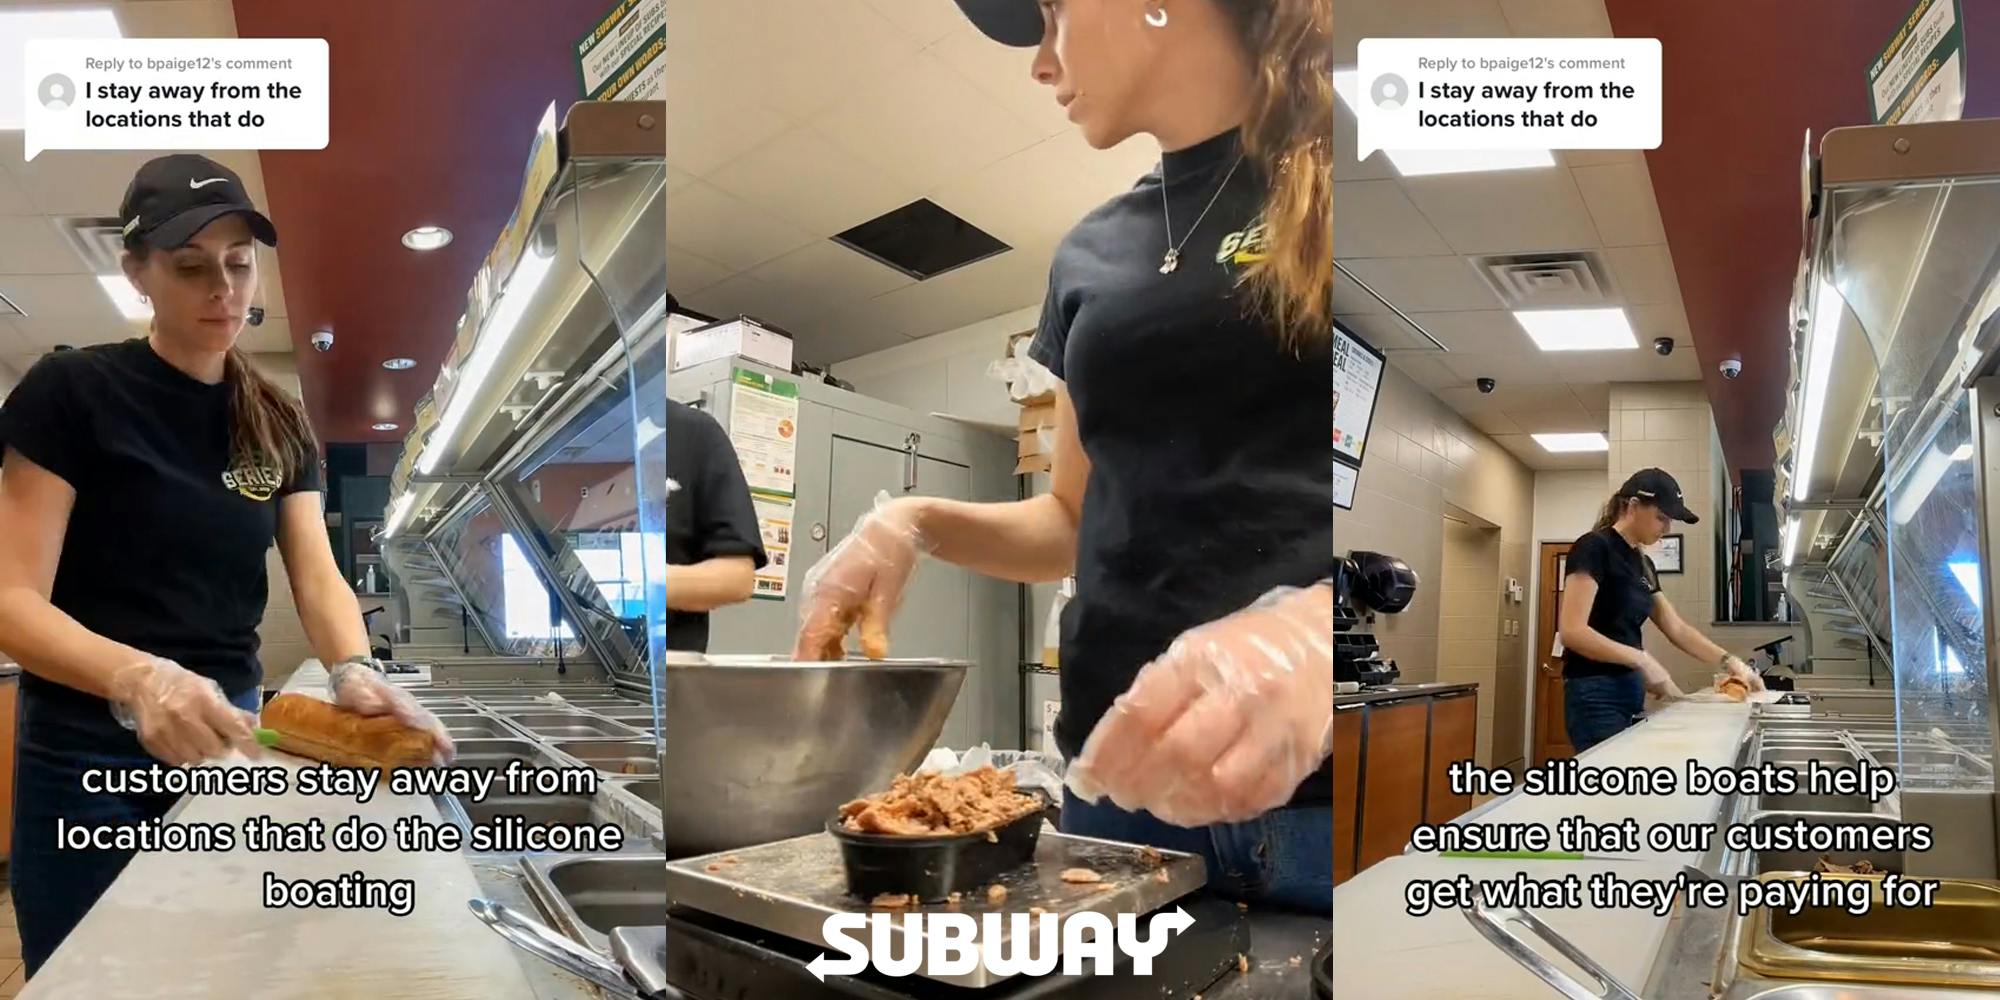 Subway worker with caption "I stay away from the locations that do" "customer stay away from locations that do the silicone boating" (l) Subway worker portioning meat into silicone boat with Subway logo at bottom (c) Subway worker with caption "I stay away from the locations that do" "the silicone boats help ensure that our customers get what they're paying for" (r)